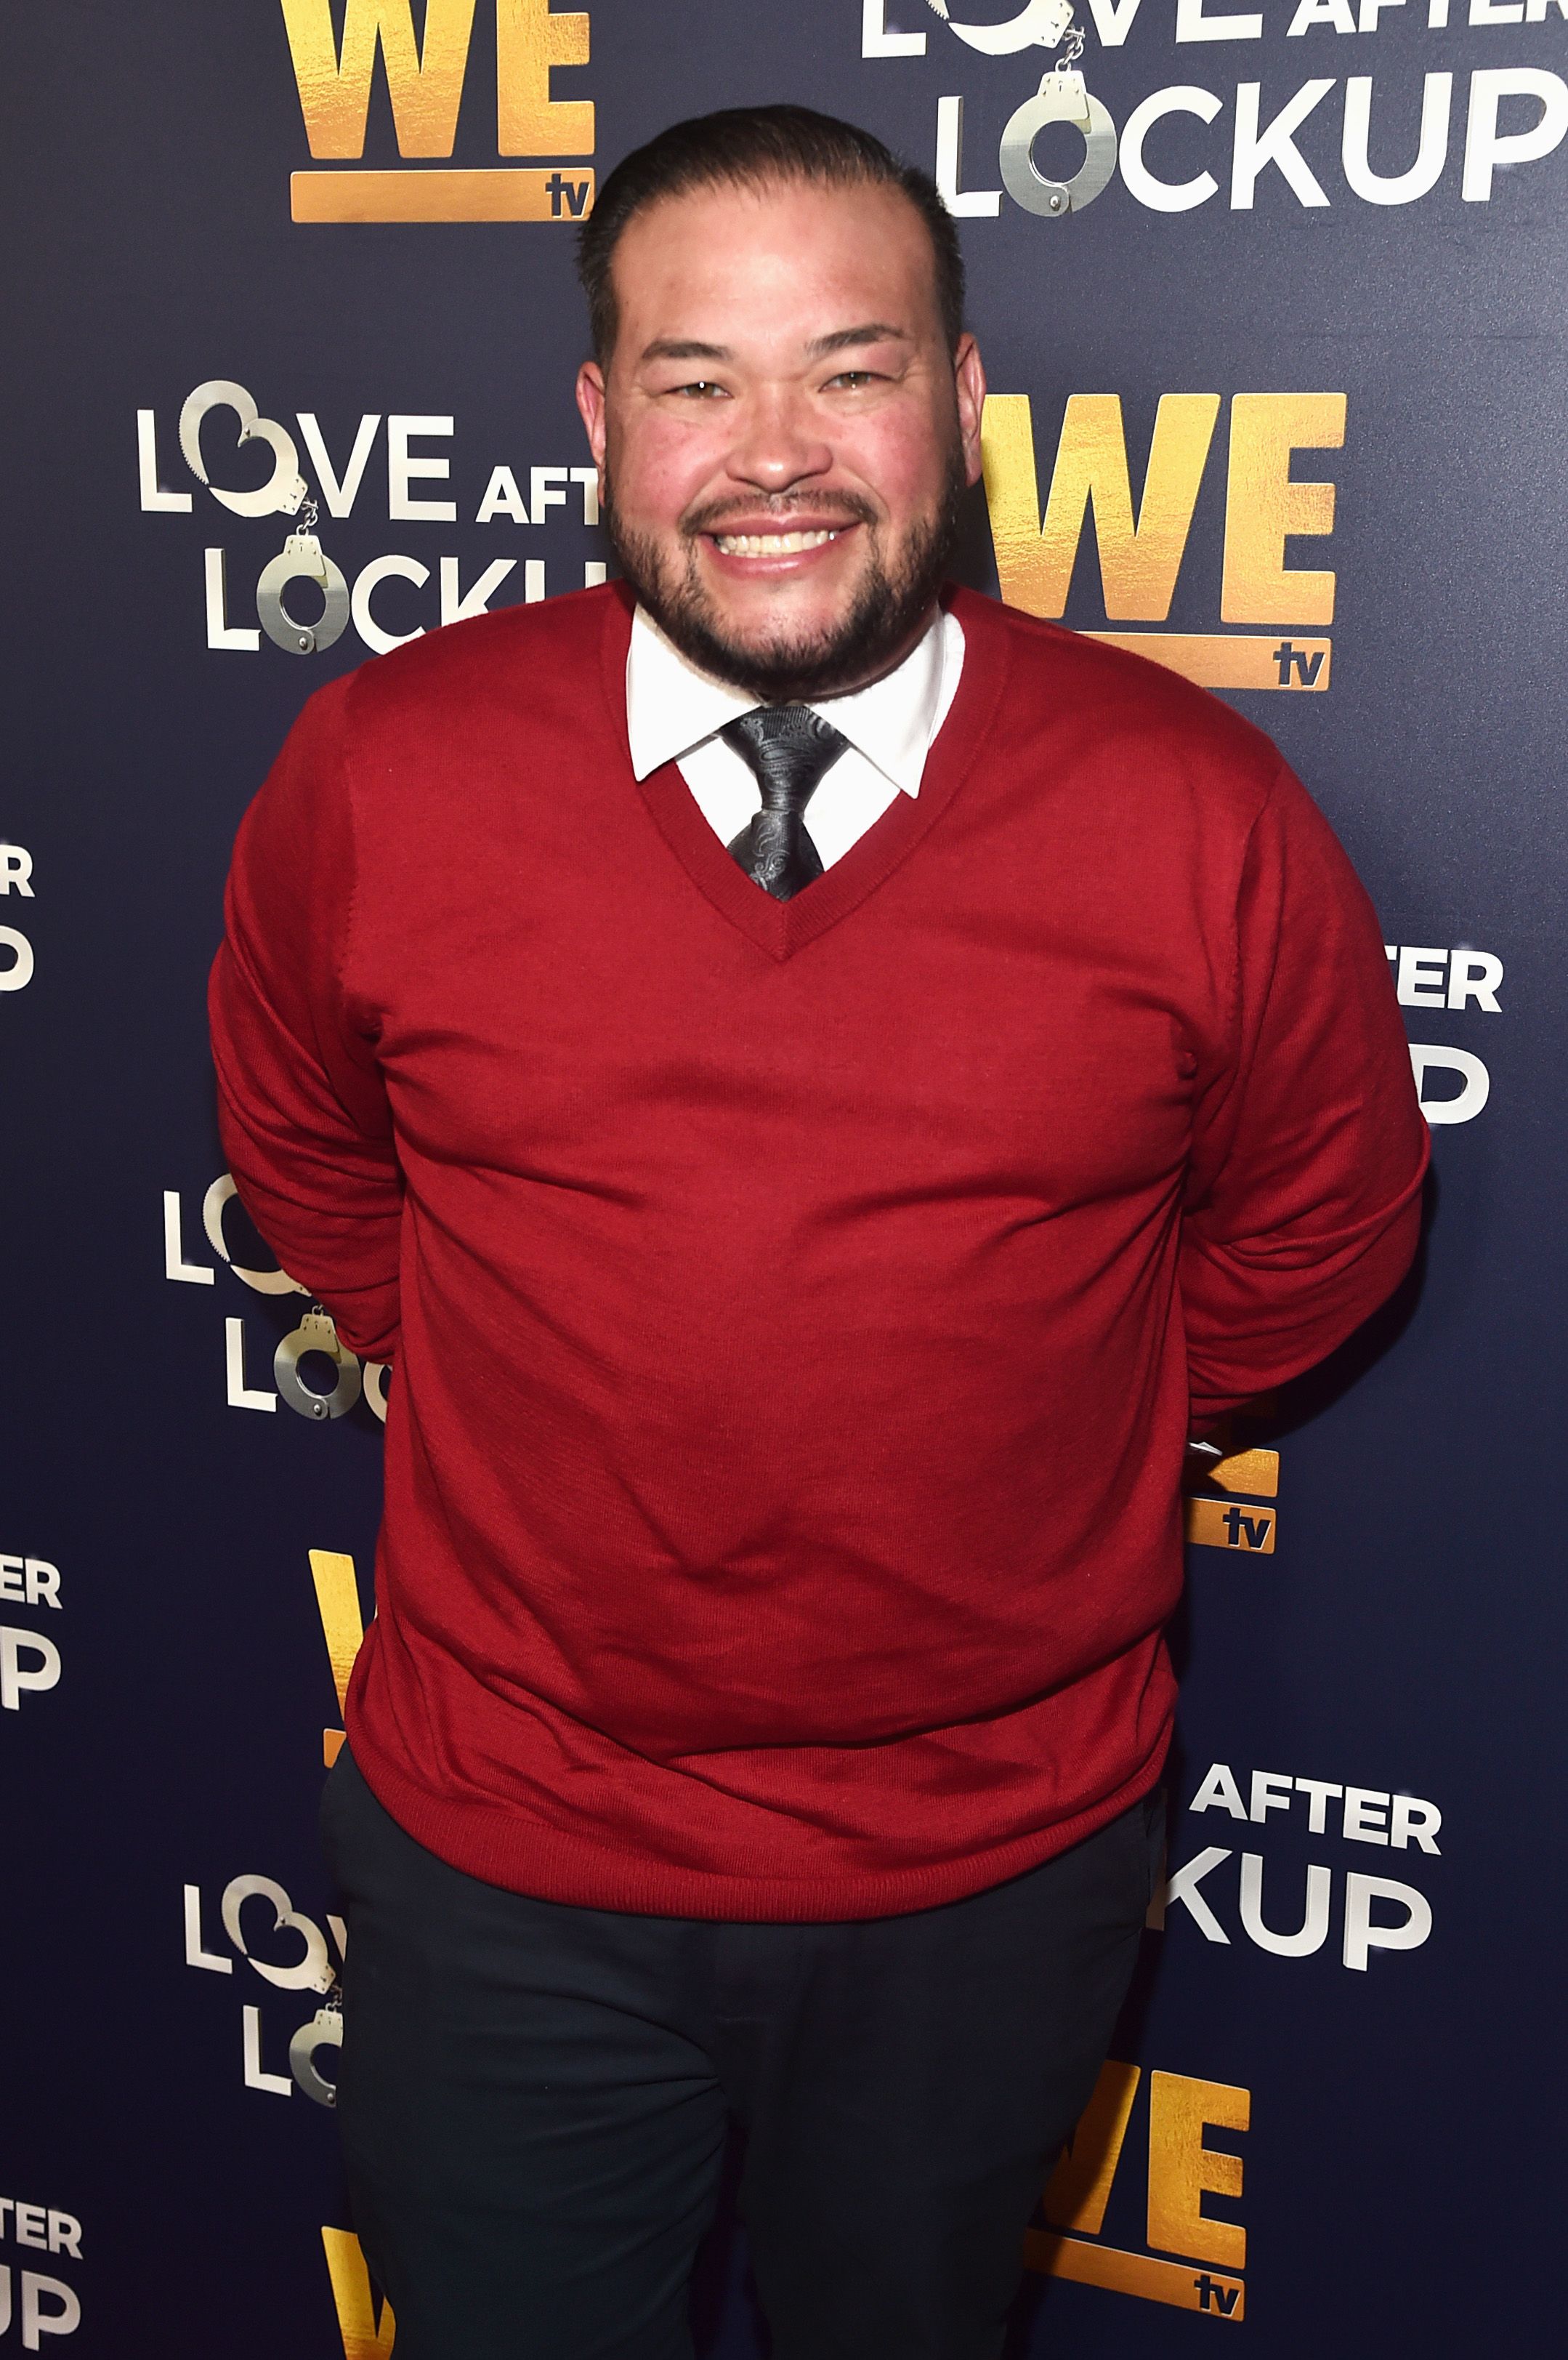 Jon Gosselin at WE tv on December 11, 2018, in Beverly Hills, California. | Source: Getty Images